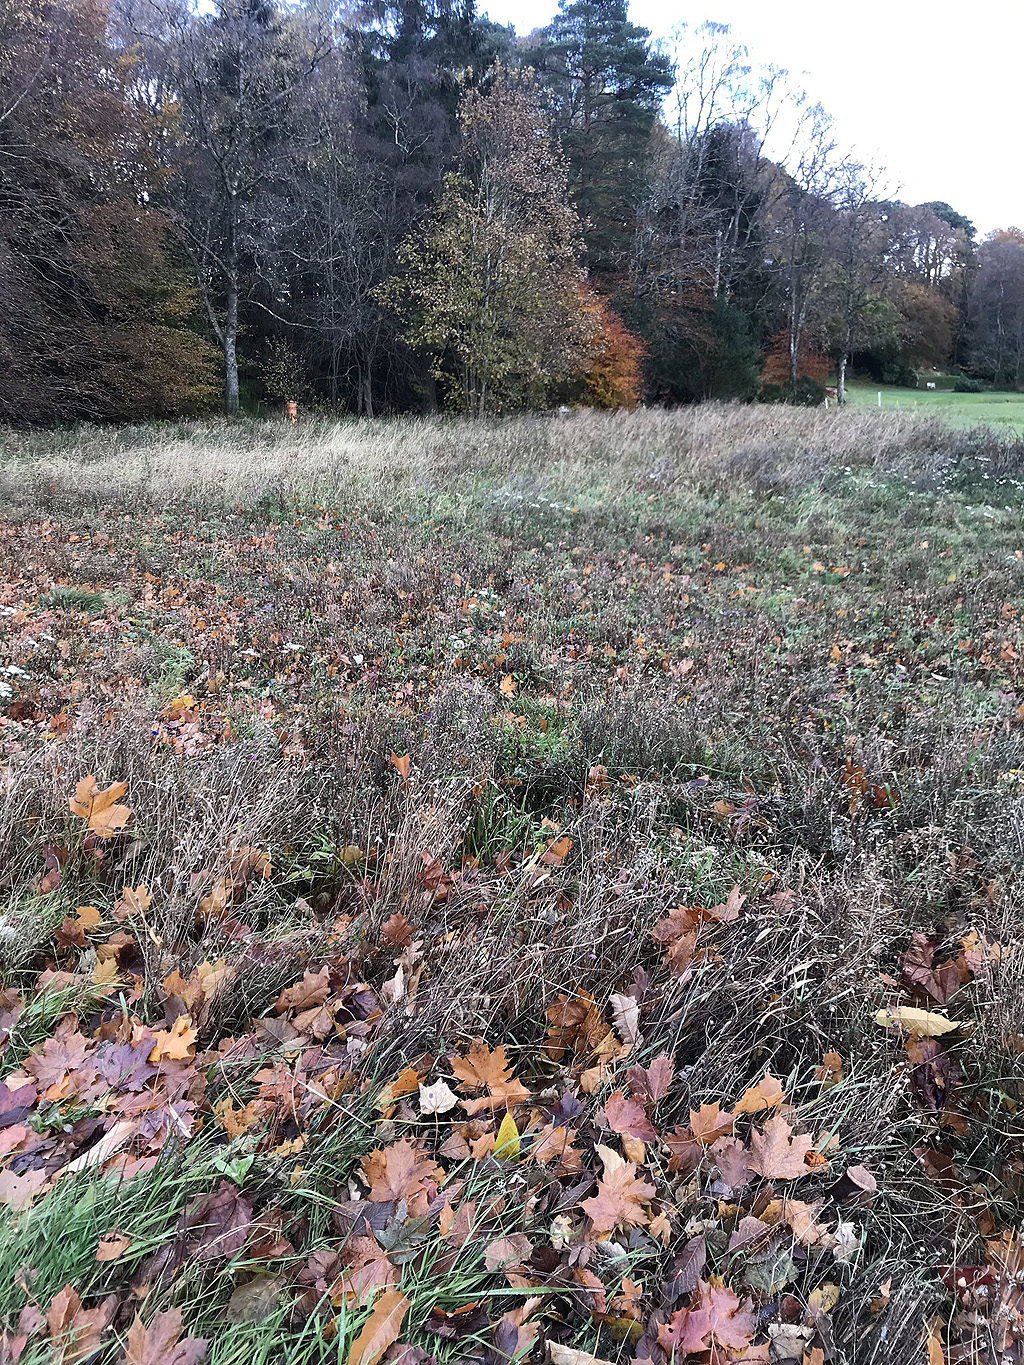 Banchory wildflower area bashed to drop out seeds in October